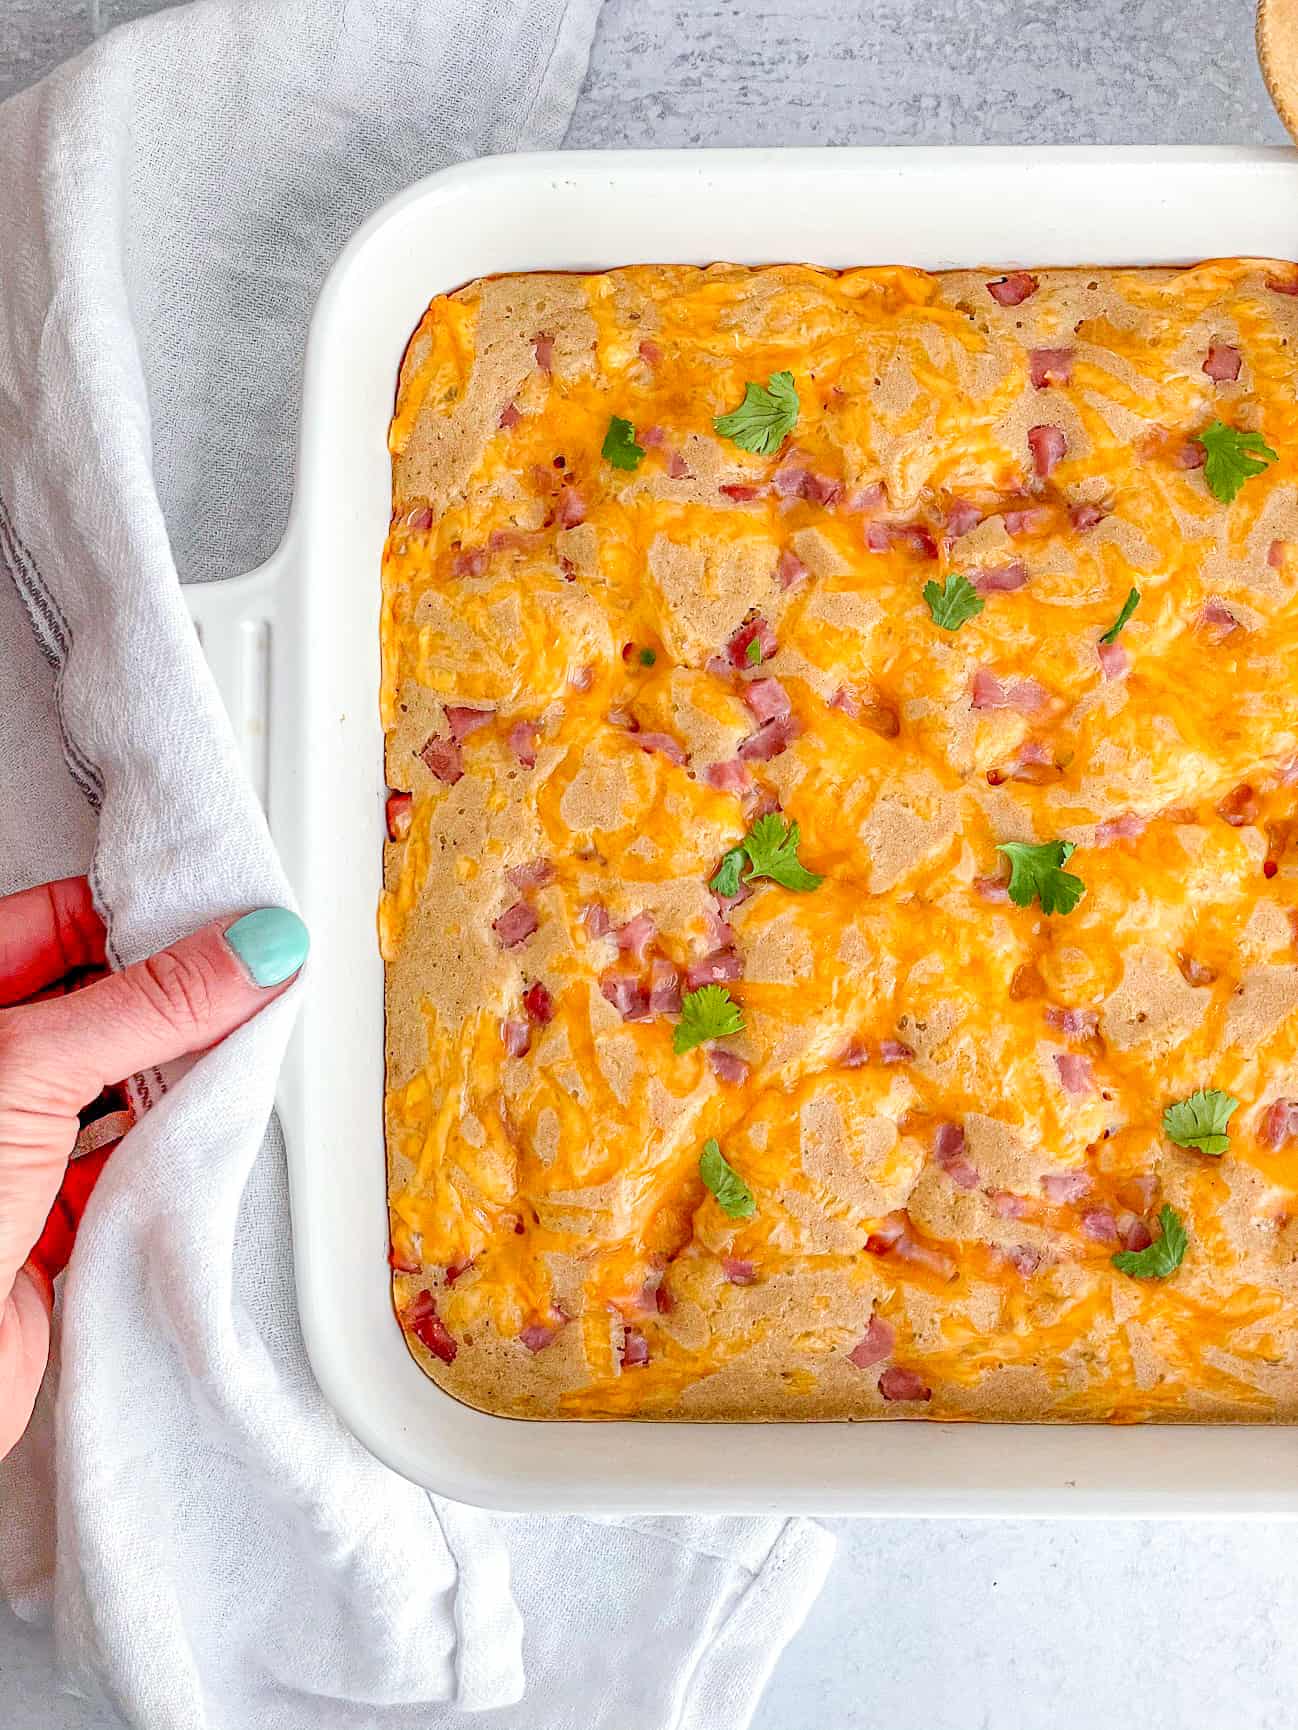 Ham and cheese breakfast bake in a casserole dish